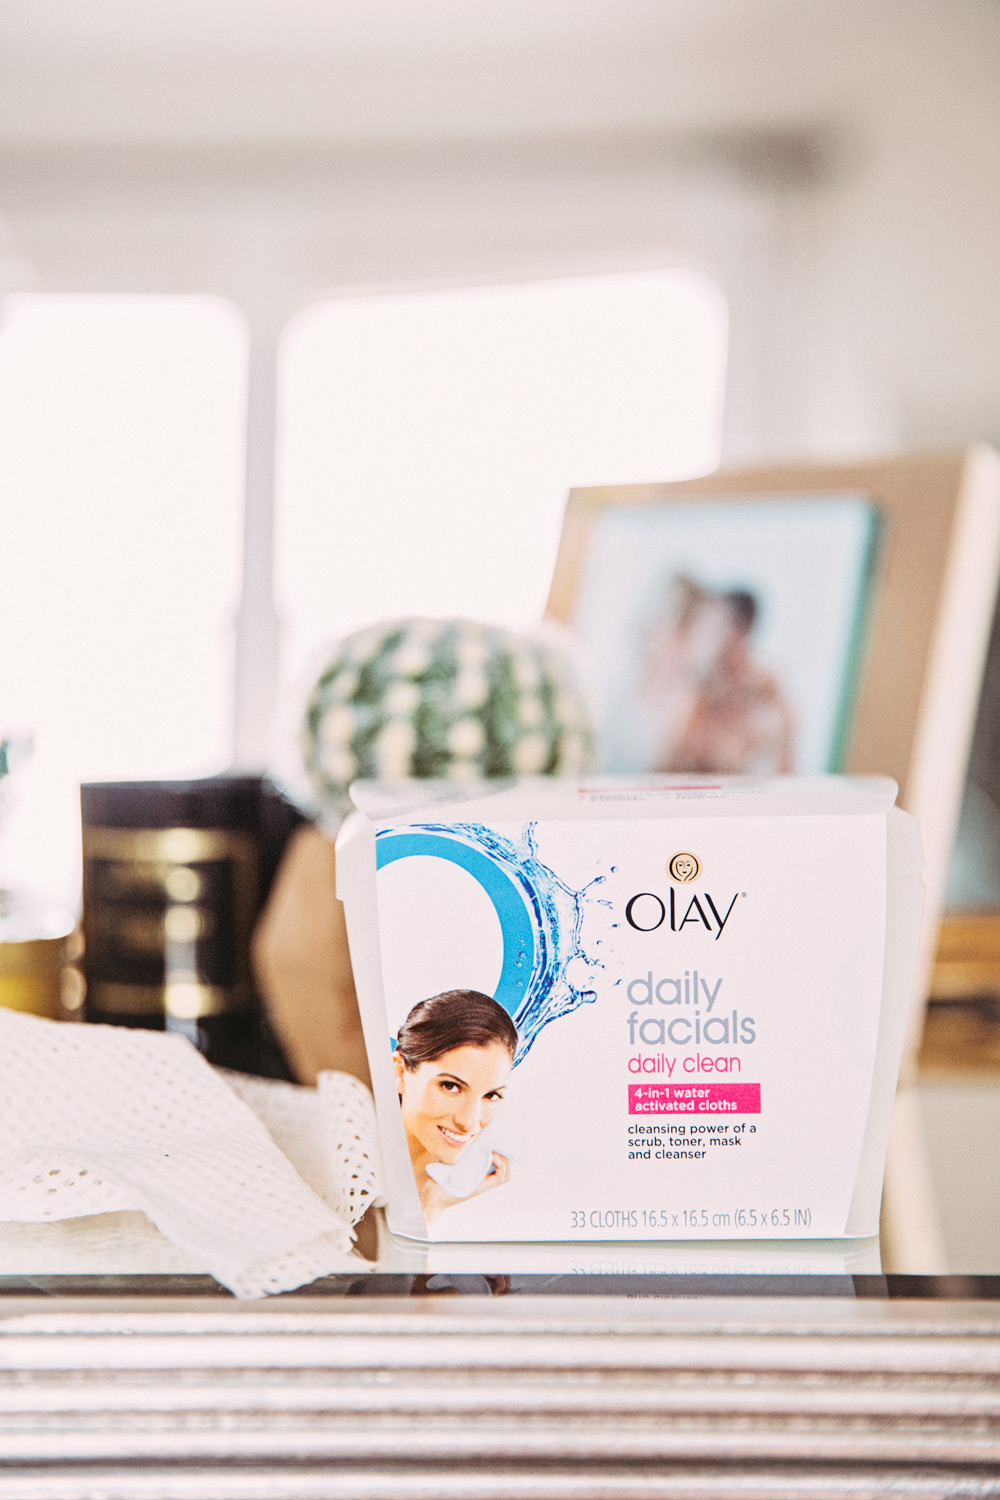 Dash of Darling shares four nighttime essentials that she keeps by her bedside on her nightstand, including Olay Daily Facials cleansing cloths.